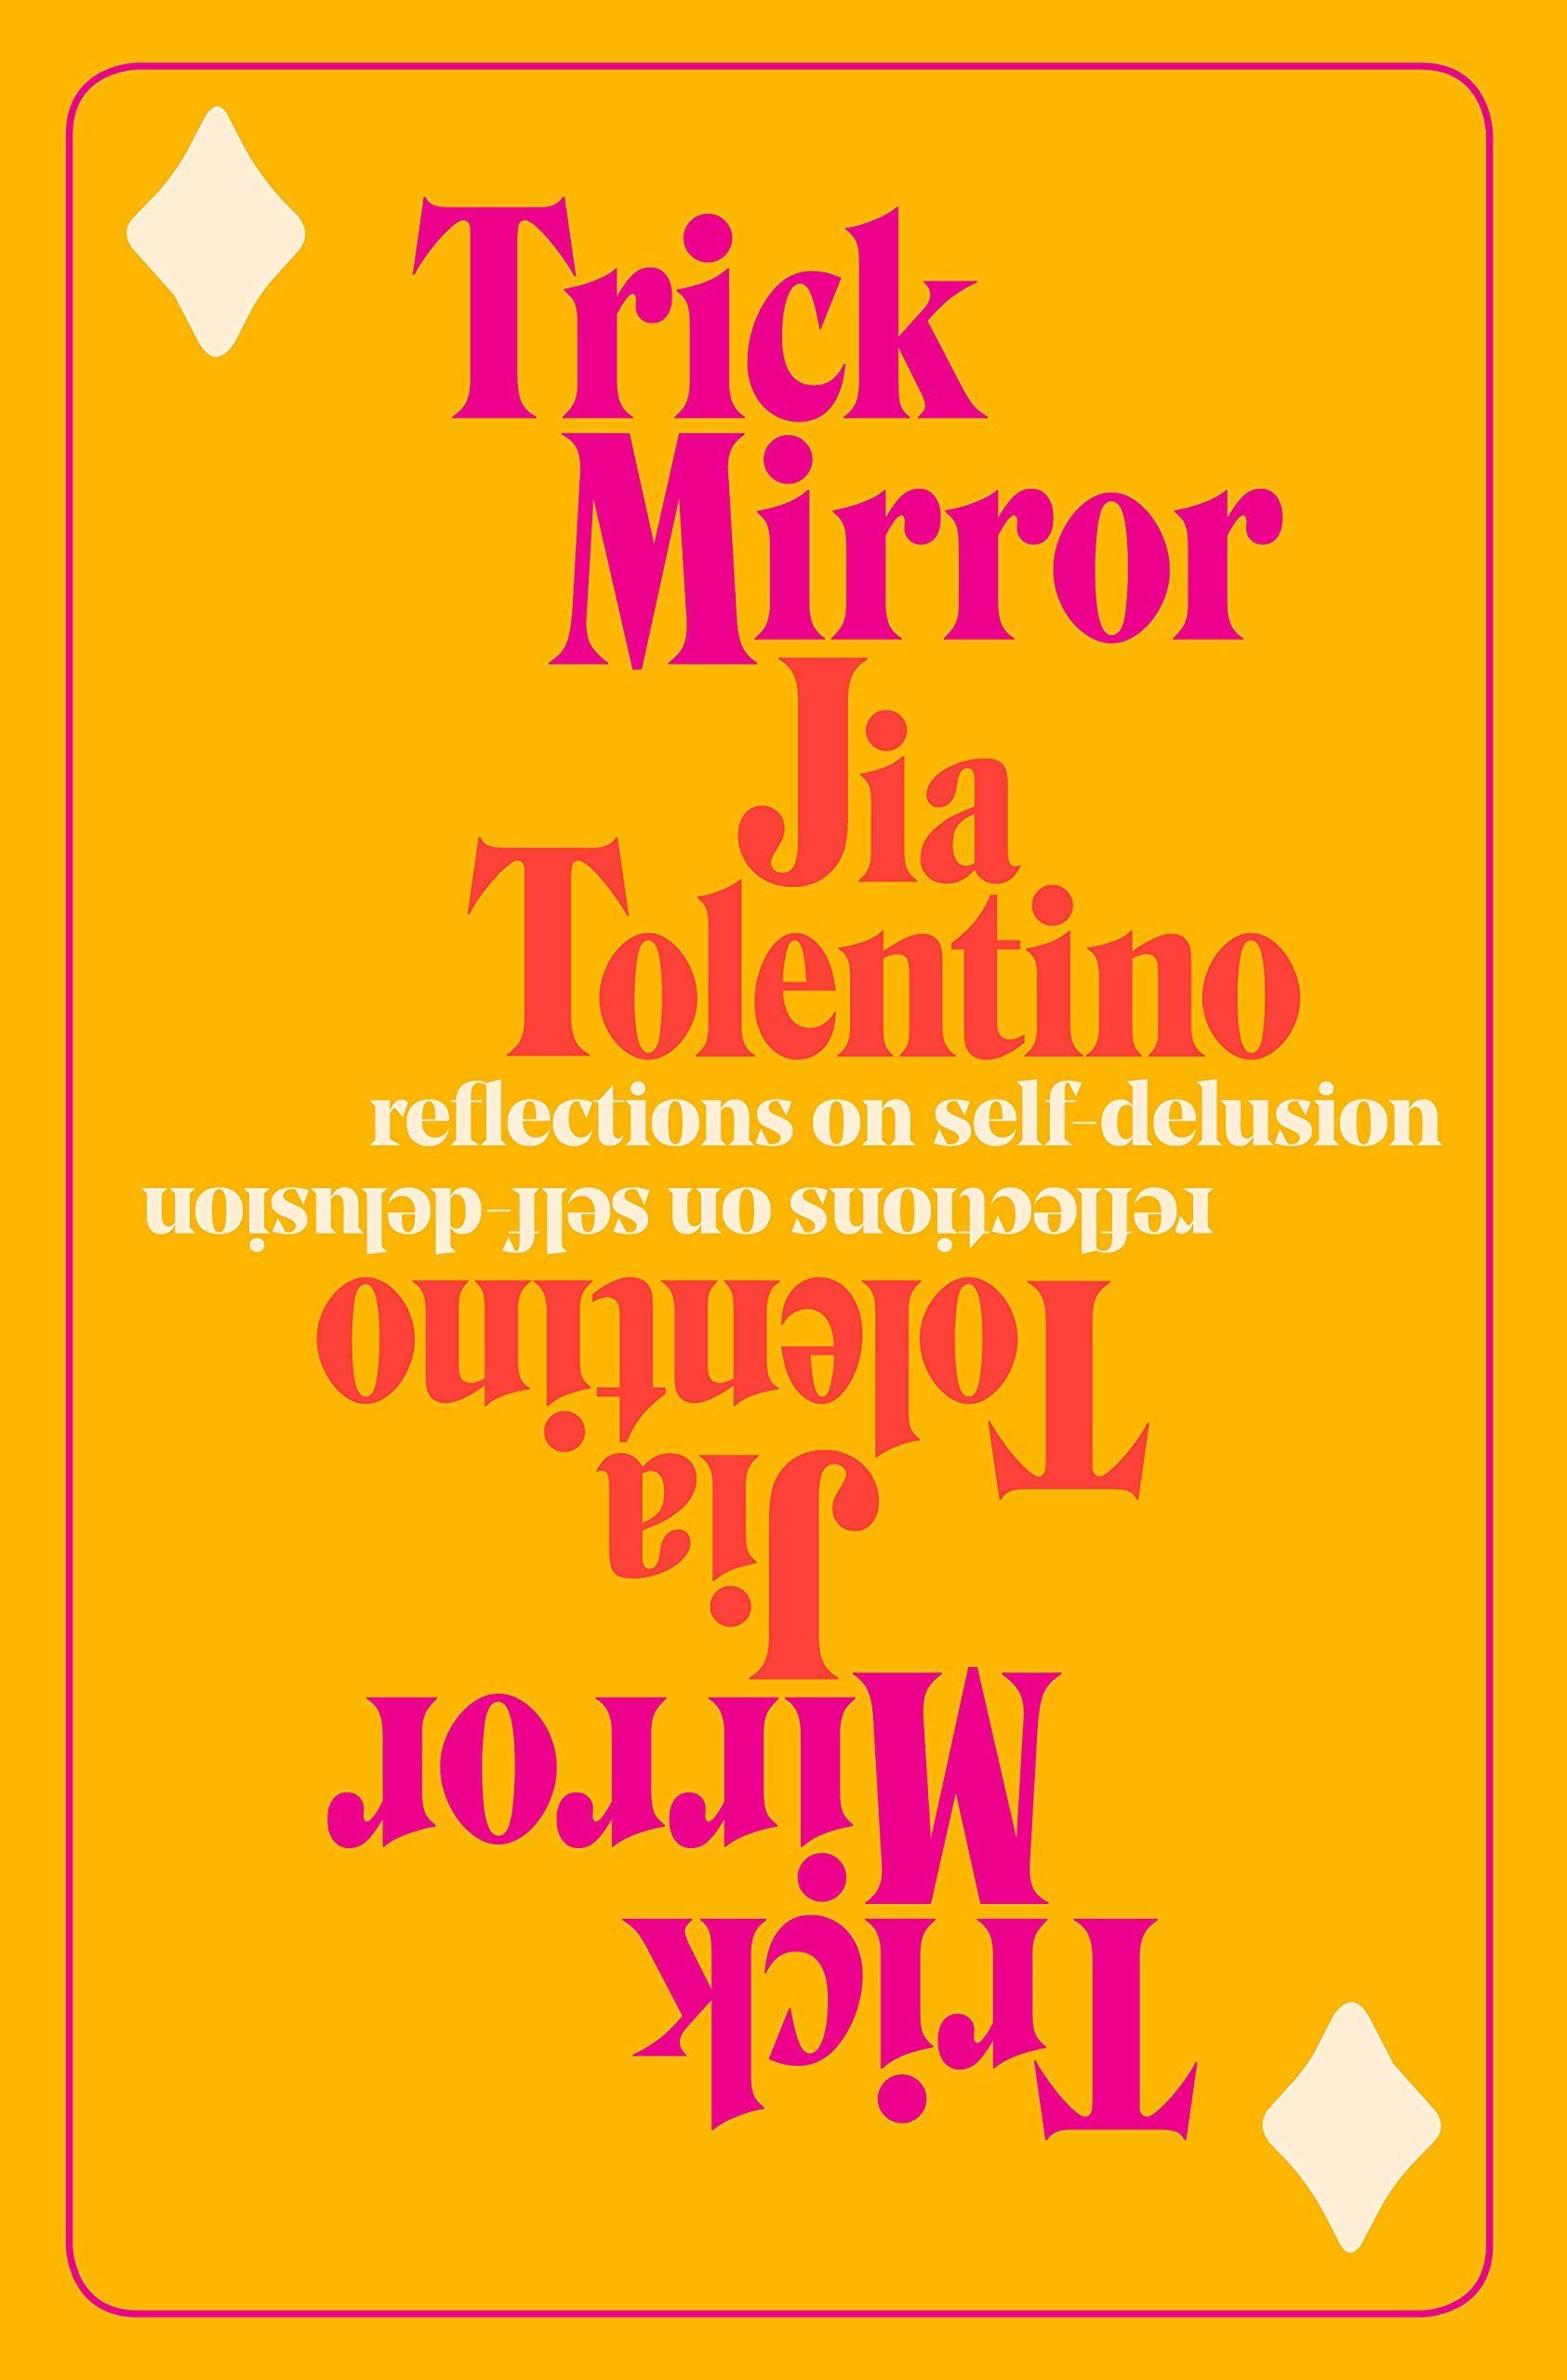 Identity Shaping on Social Media: On Jia Tolentino’s “Trick Mirror: Reflections on Self-Delusion”